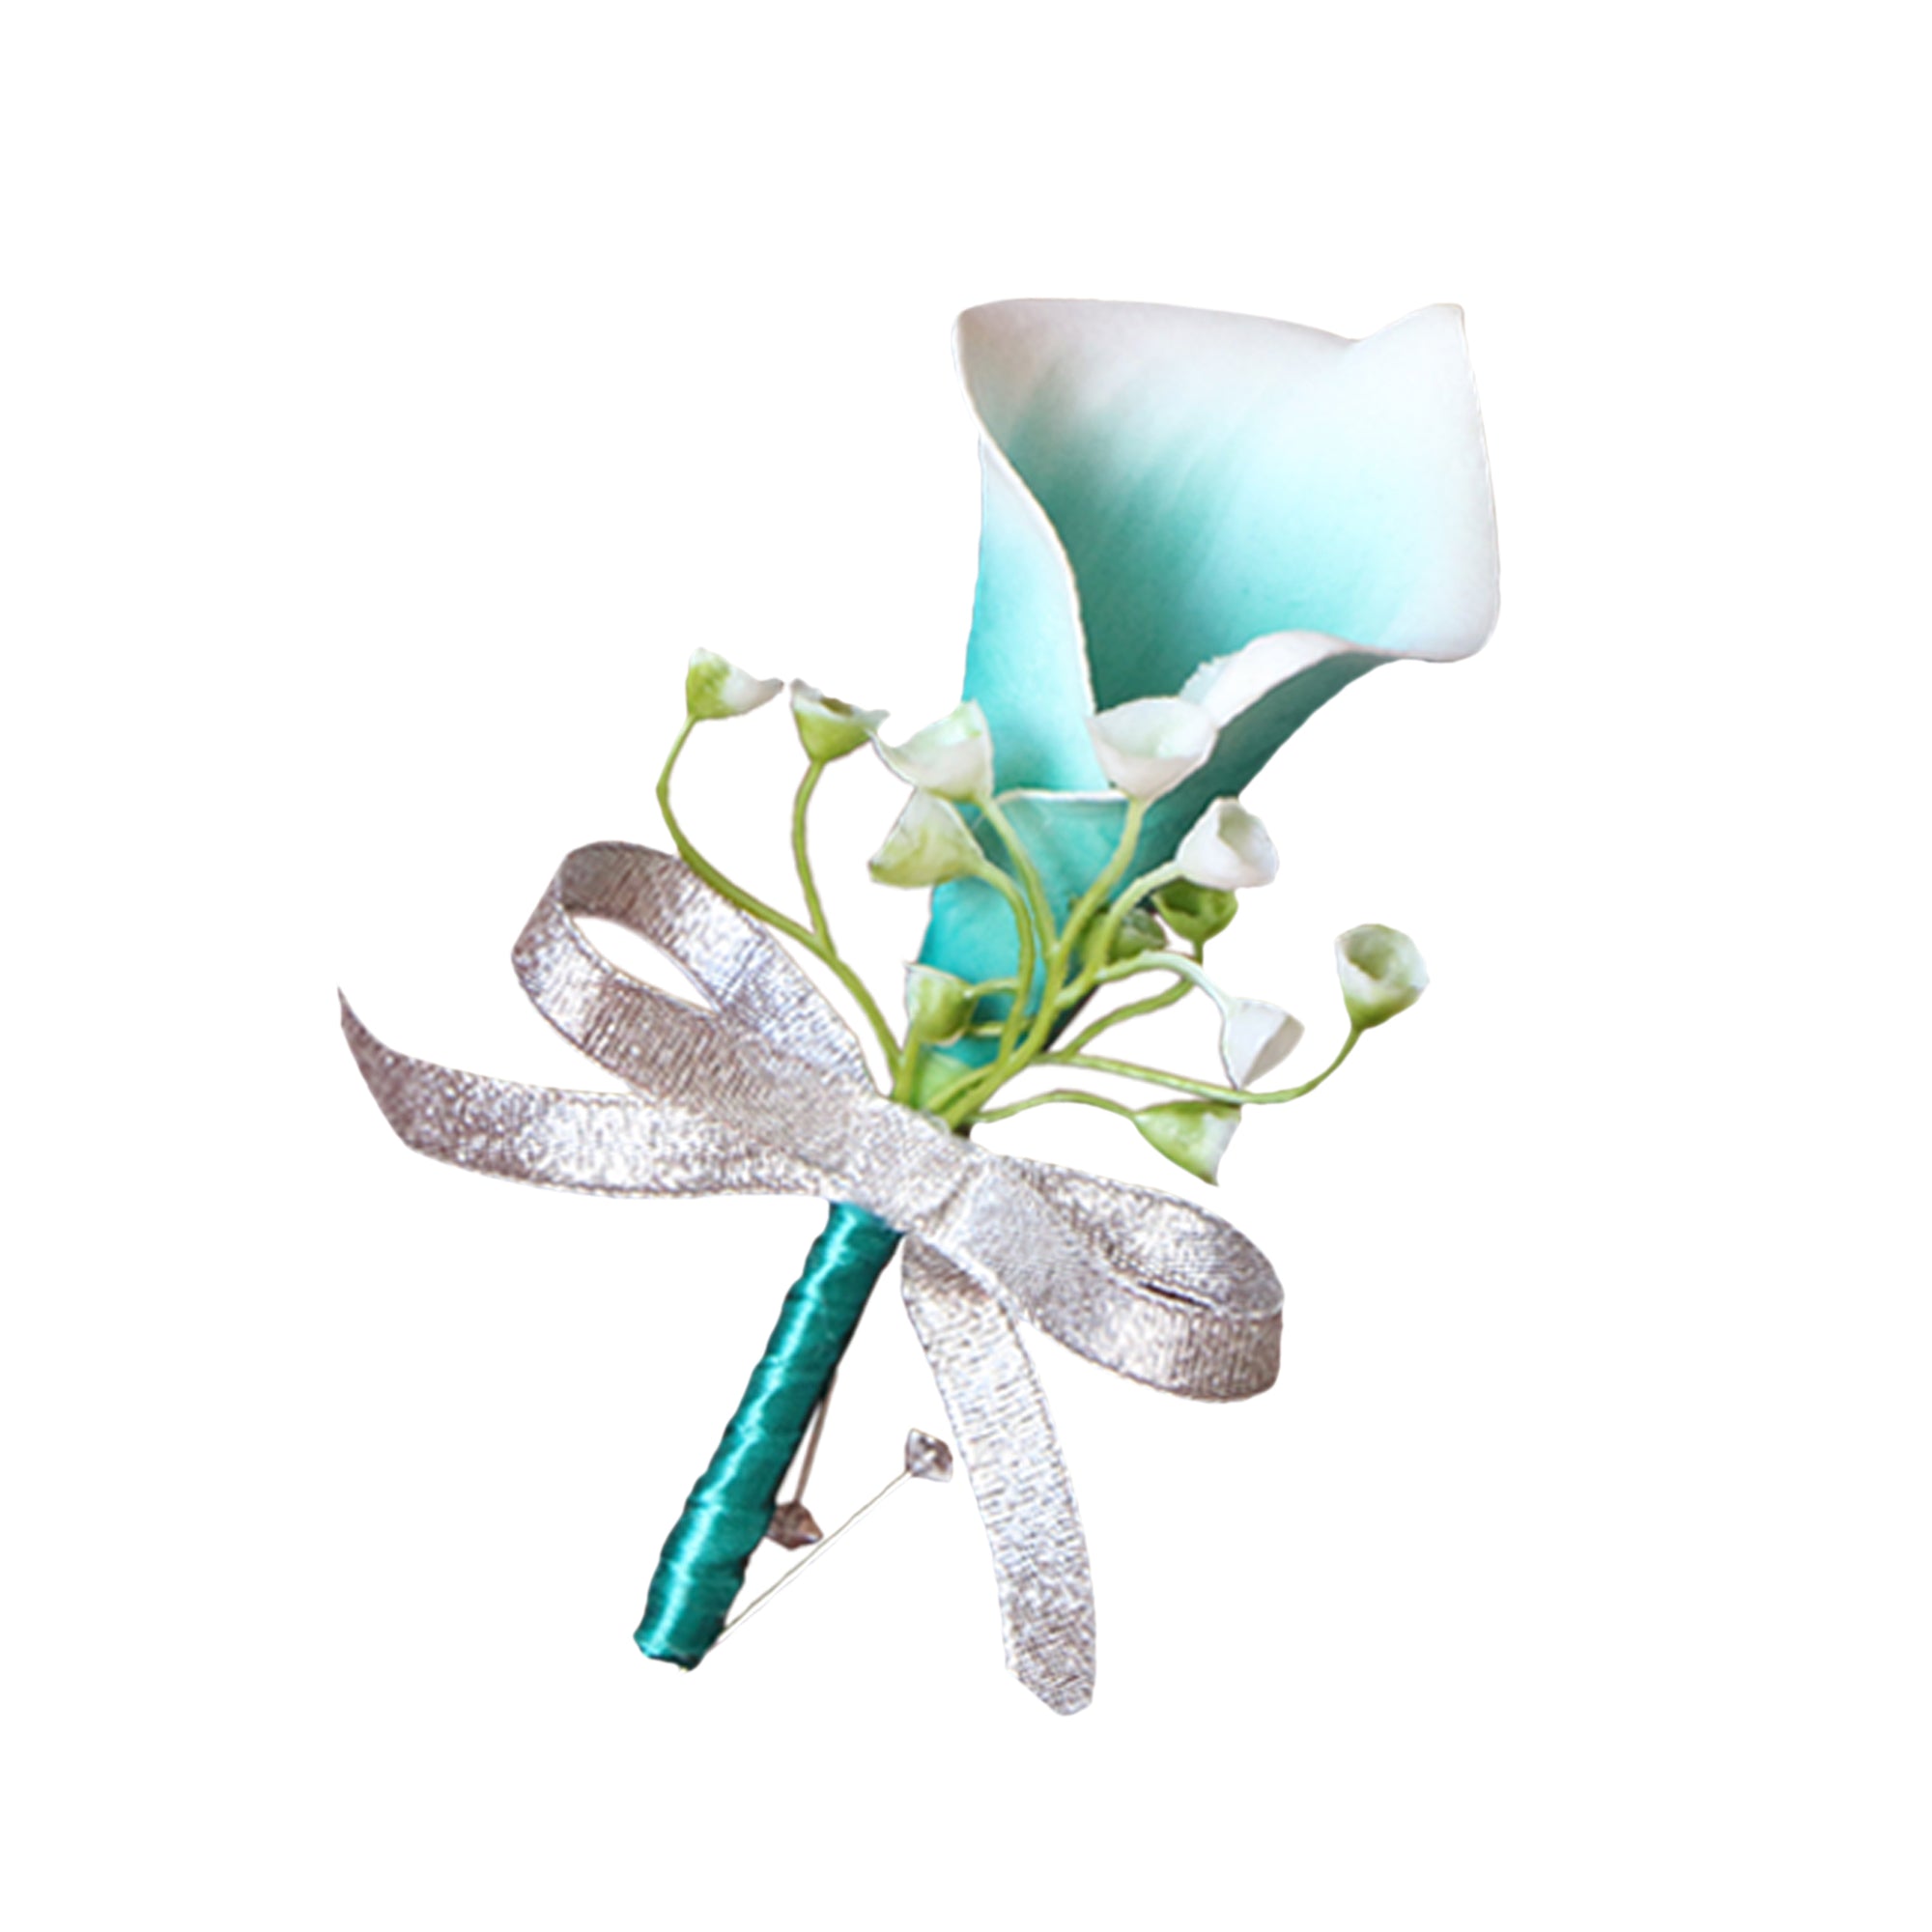 Oasis Teal Calla Lily Boutonniere Groom Bestman